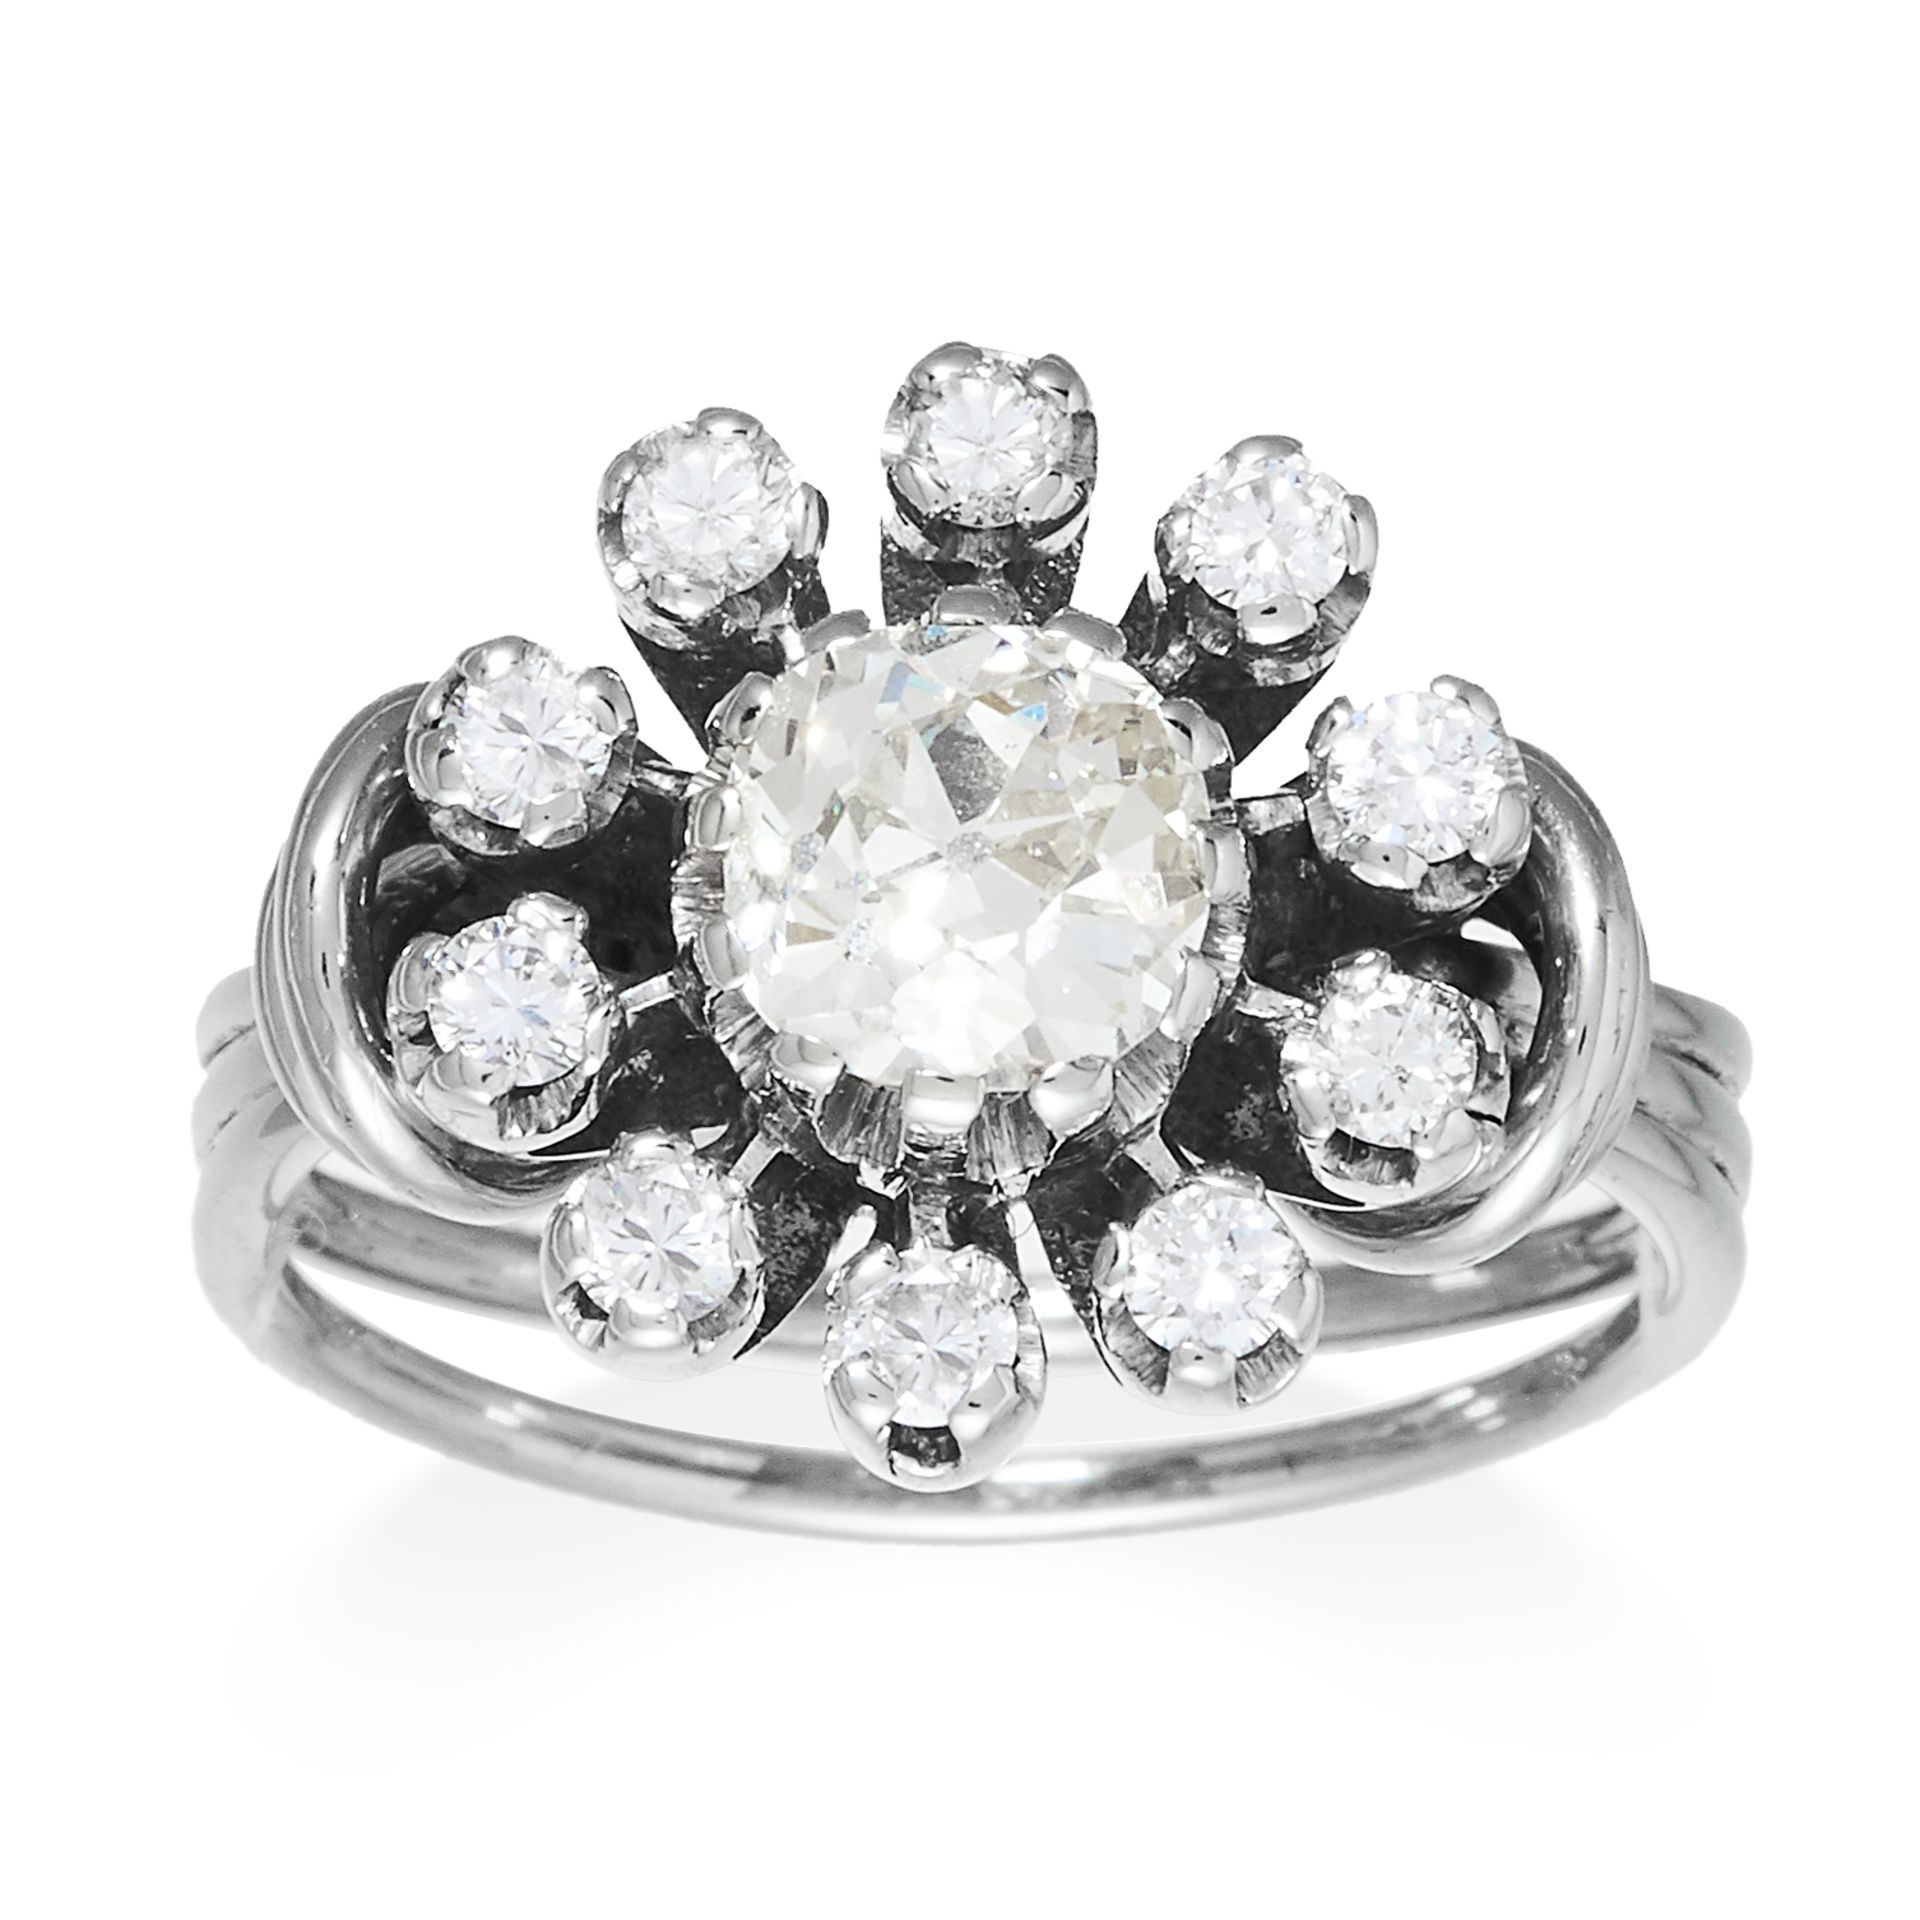 A DIAMOND CLUSTER DRESS RING in platinum or white gold, set with an old cut diamond of 1.20 carats